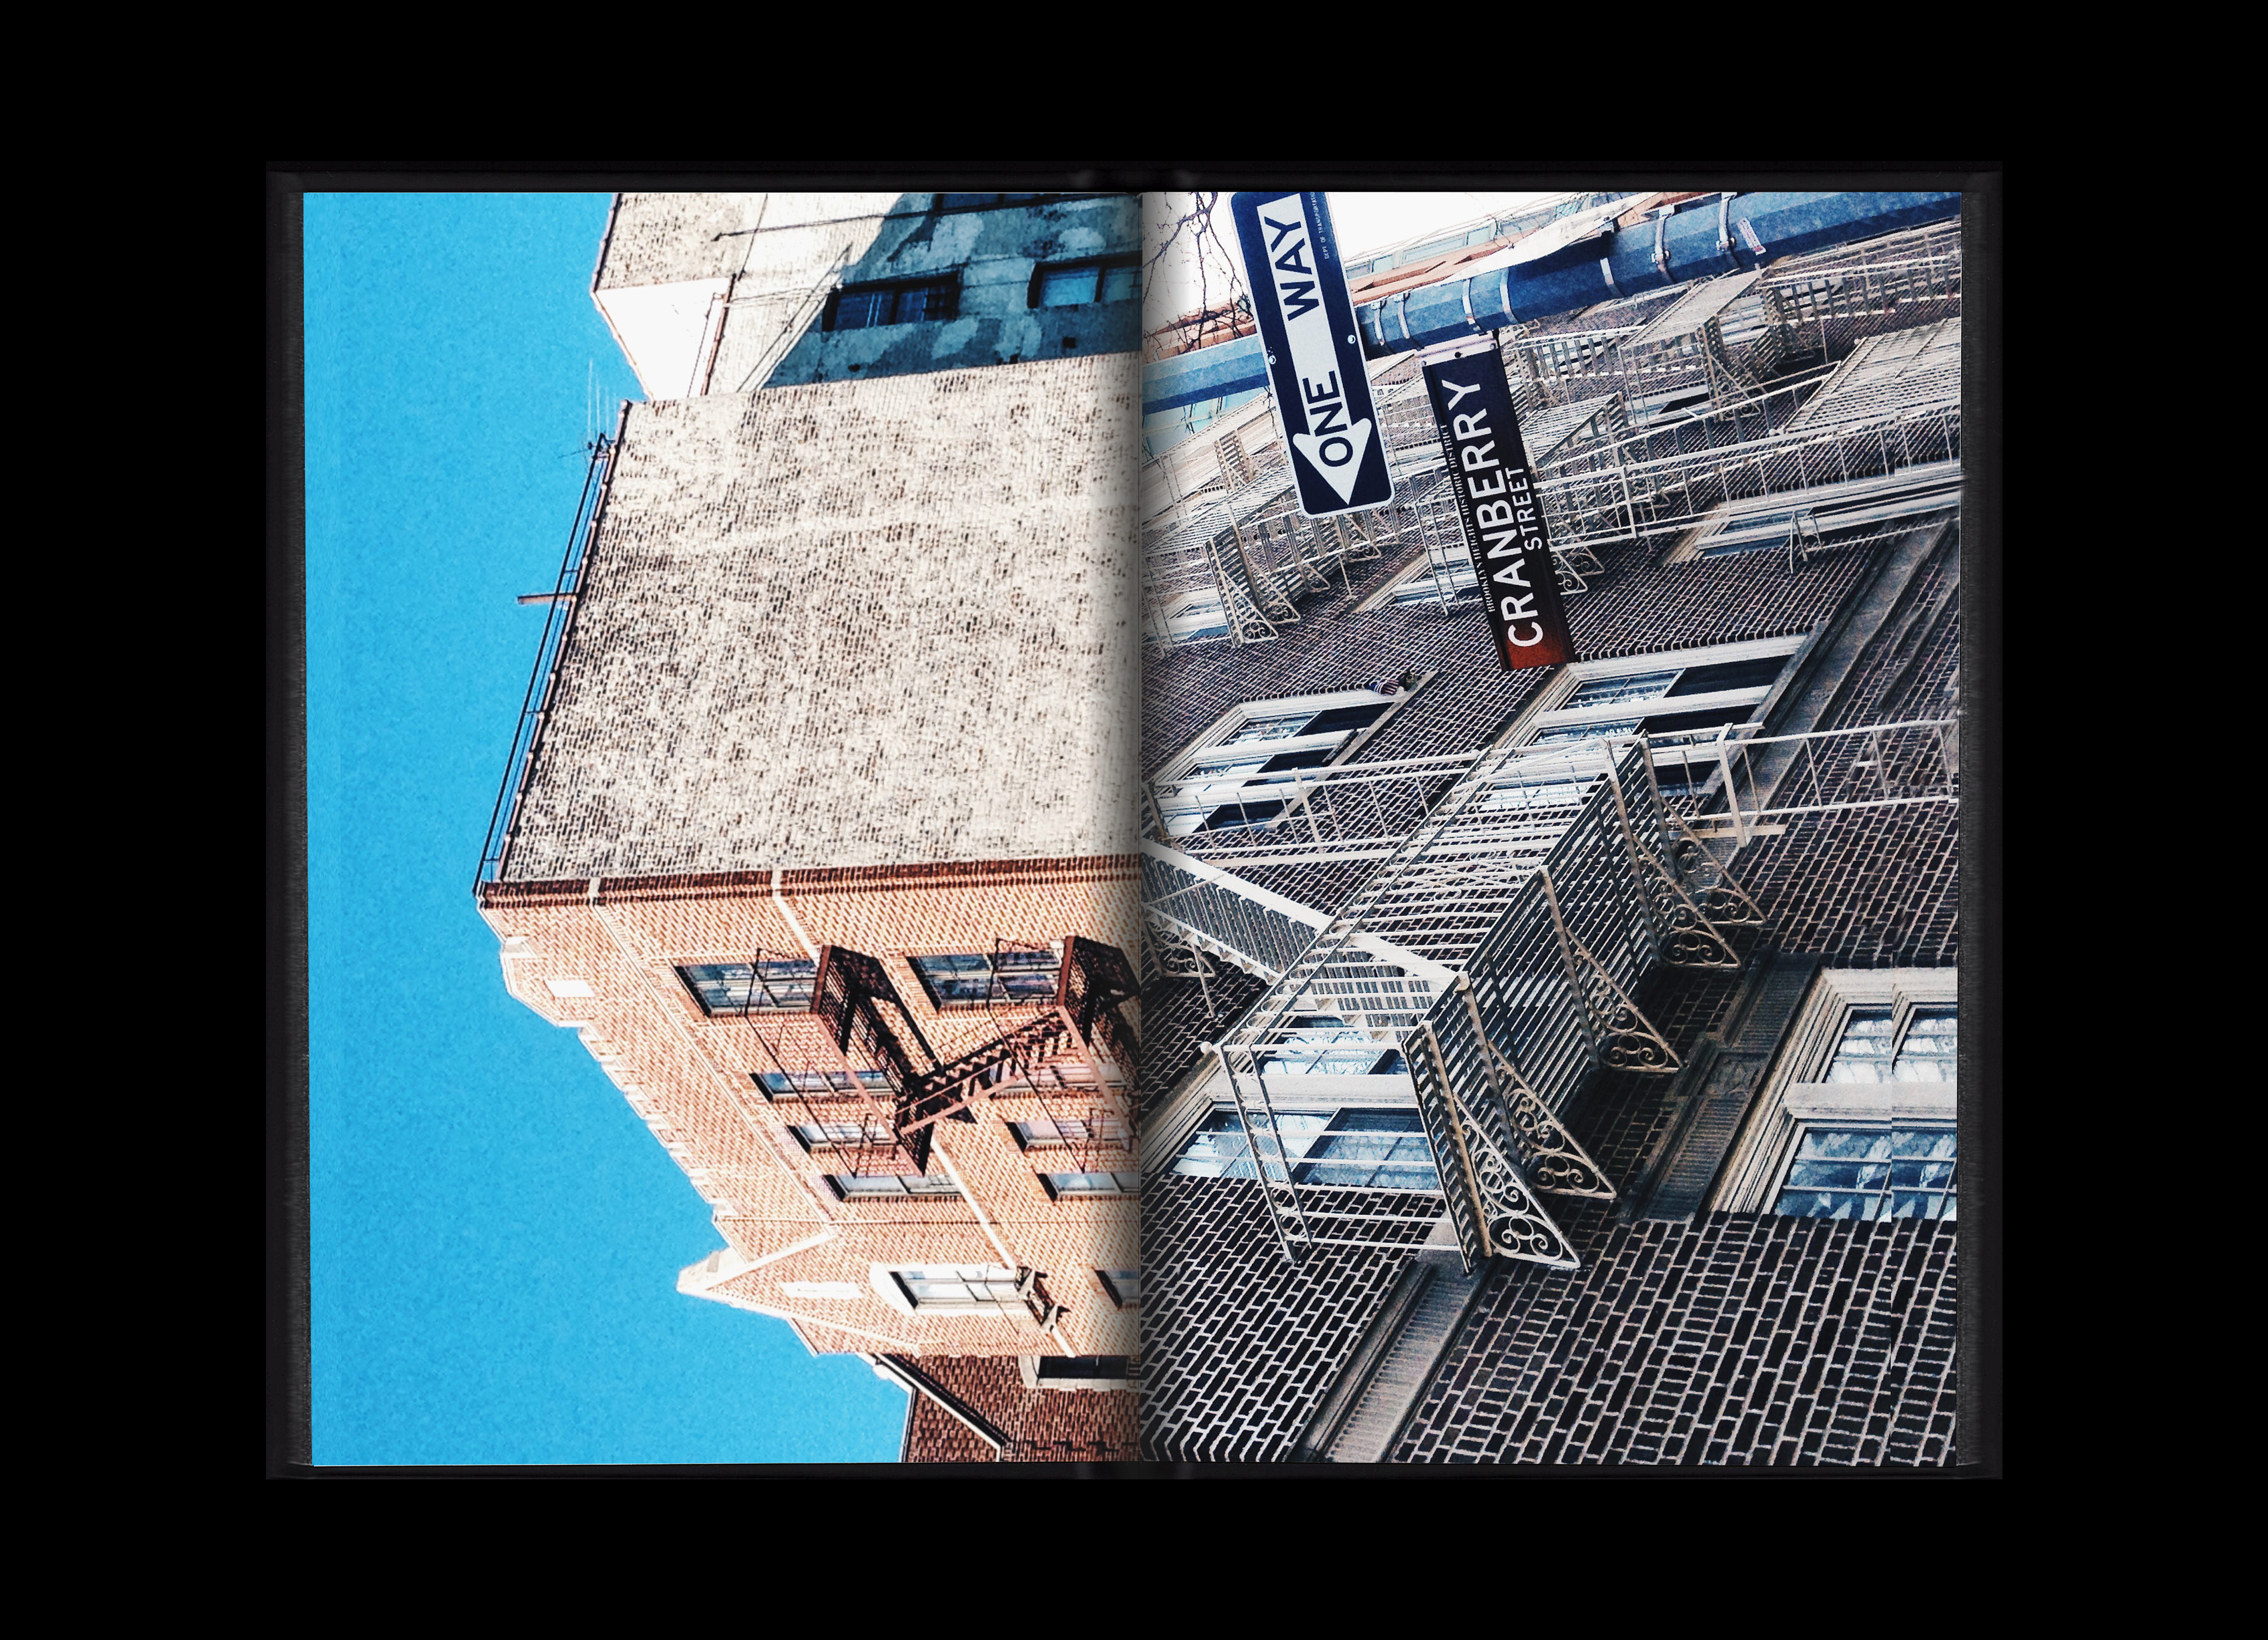 http://julienbaiamonte.com/content/1-projects/untitled-photobook-i/ce_nyc06.jpg